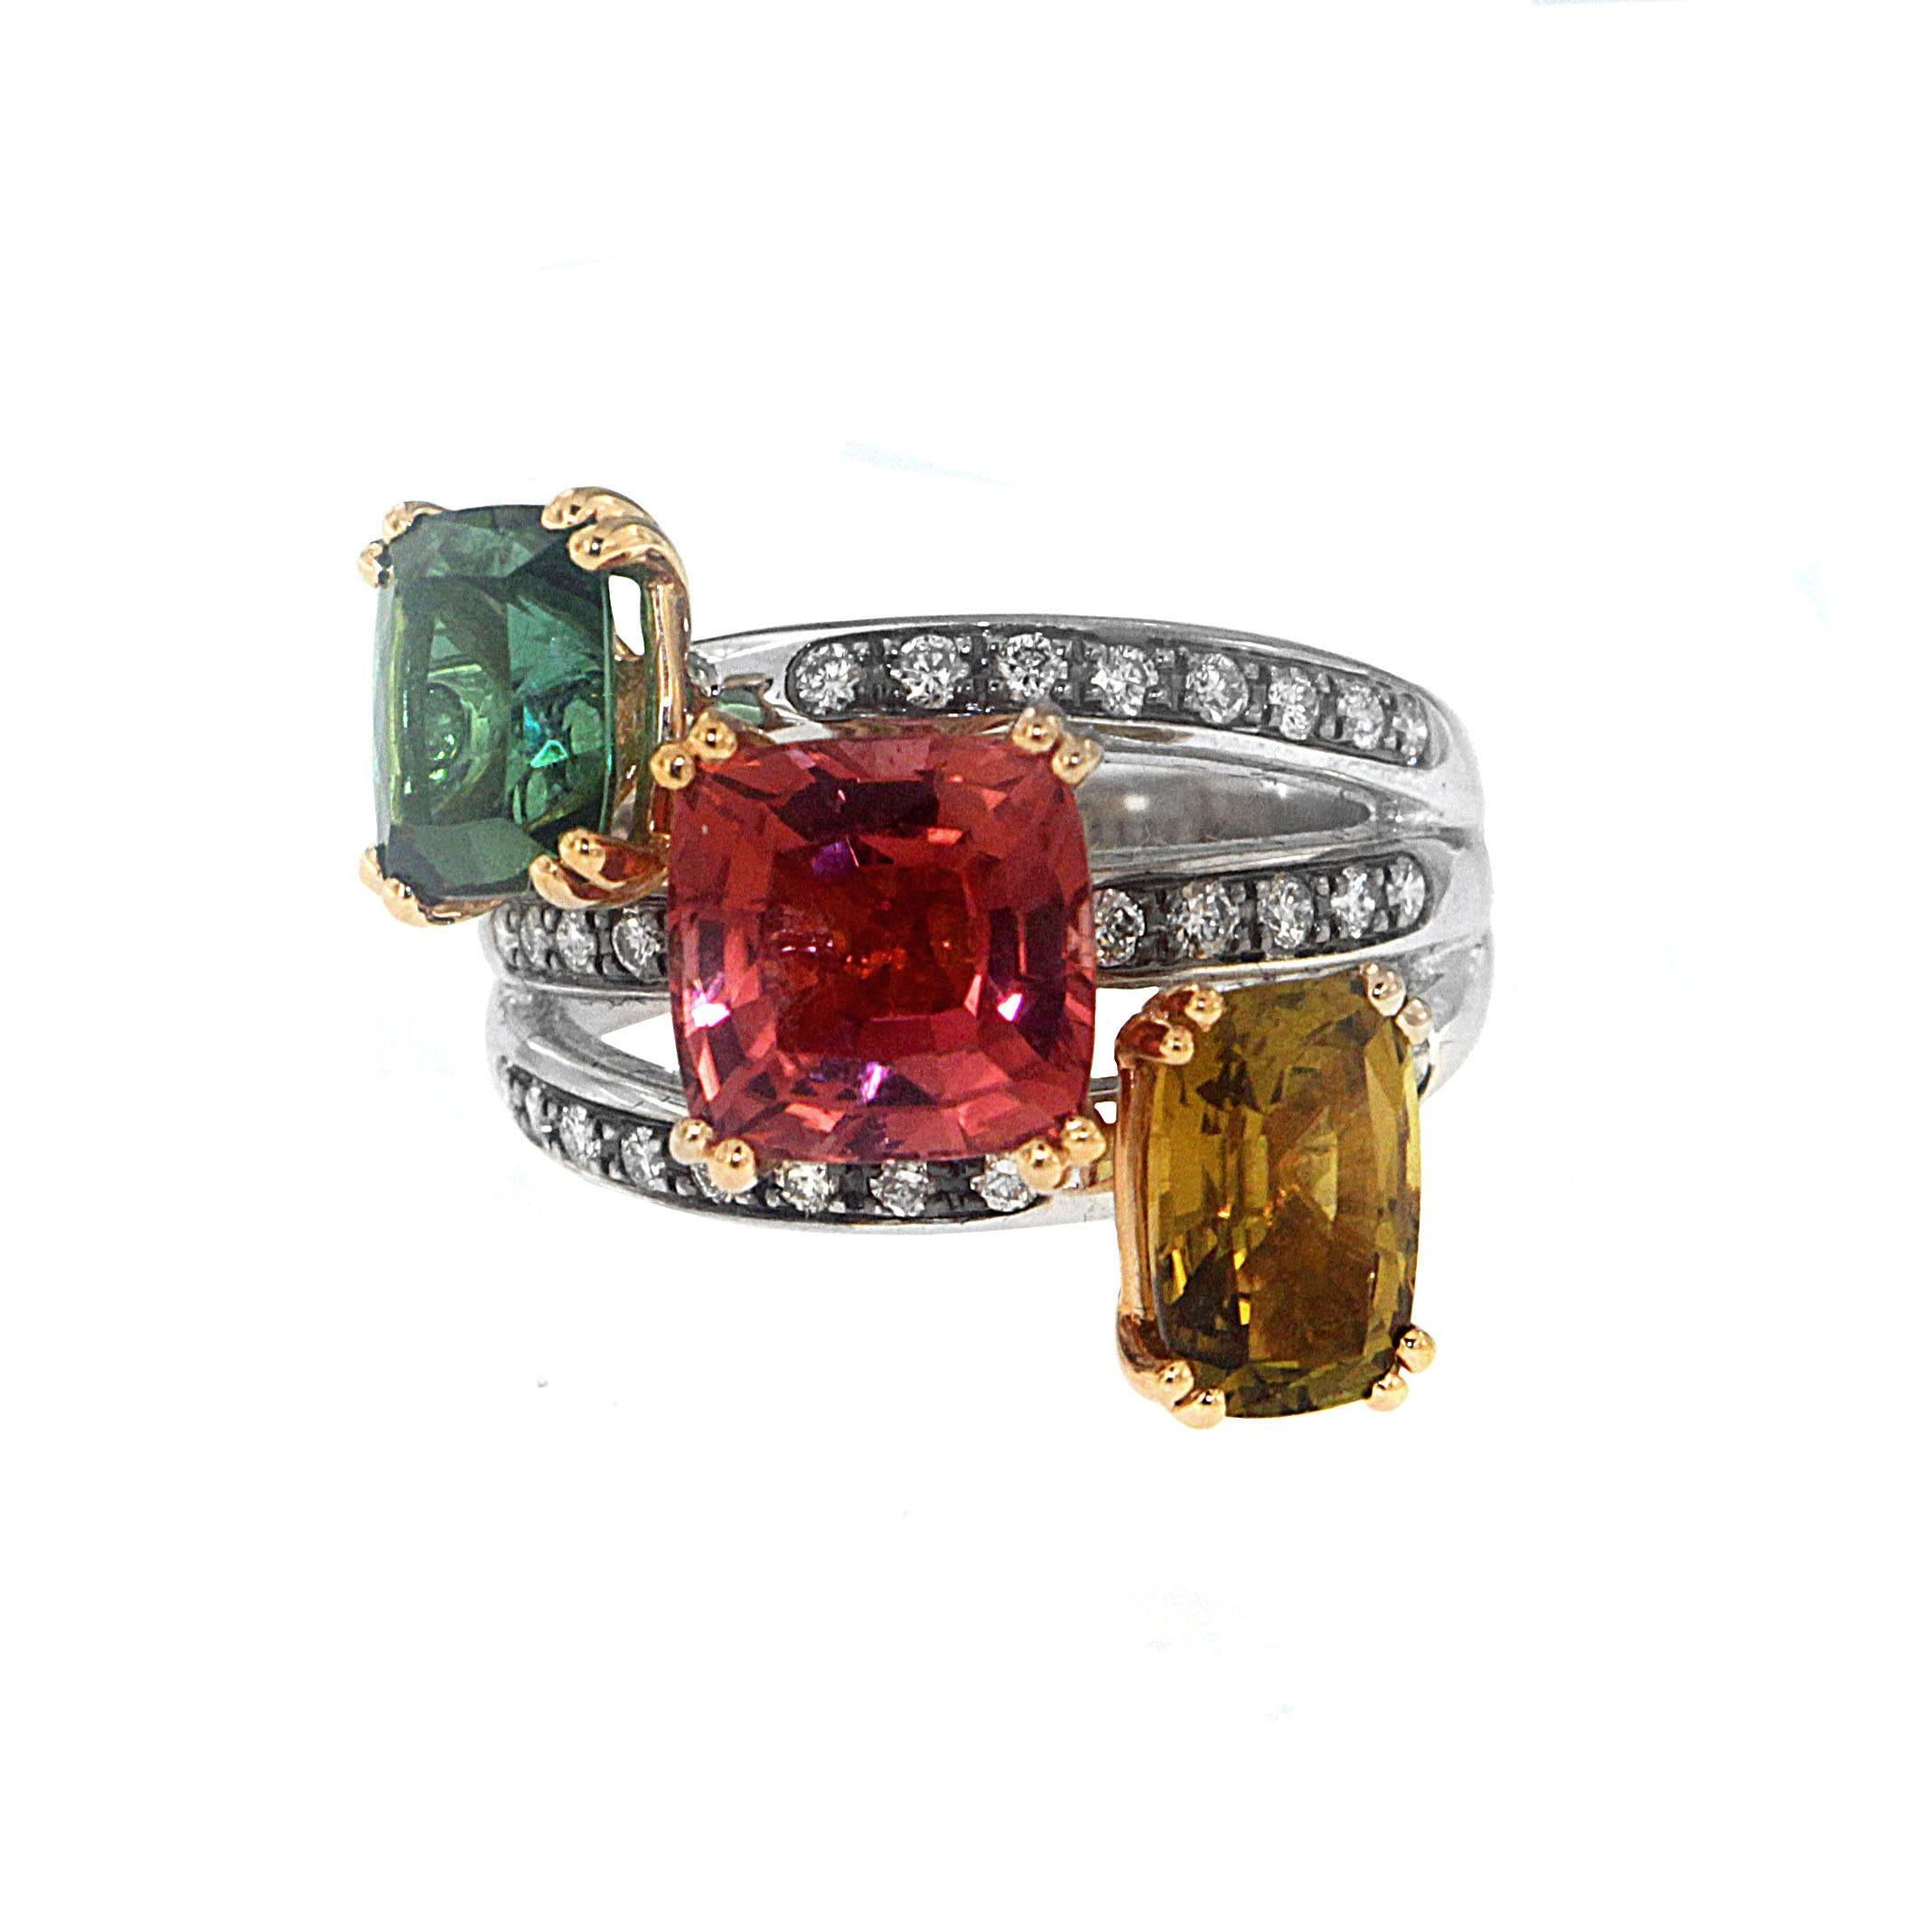 Zorab's Triple Center Stone Ring is the definition of refined elegance and distinguished taste. Marvel at 1.65 Carats of Green,3.50 of Pink and 1.74 Carats of Brown Tourmaline set with 0.38 Carats of White Diamond on each side. 

This item has a